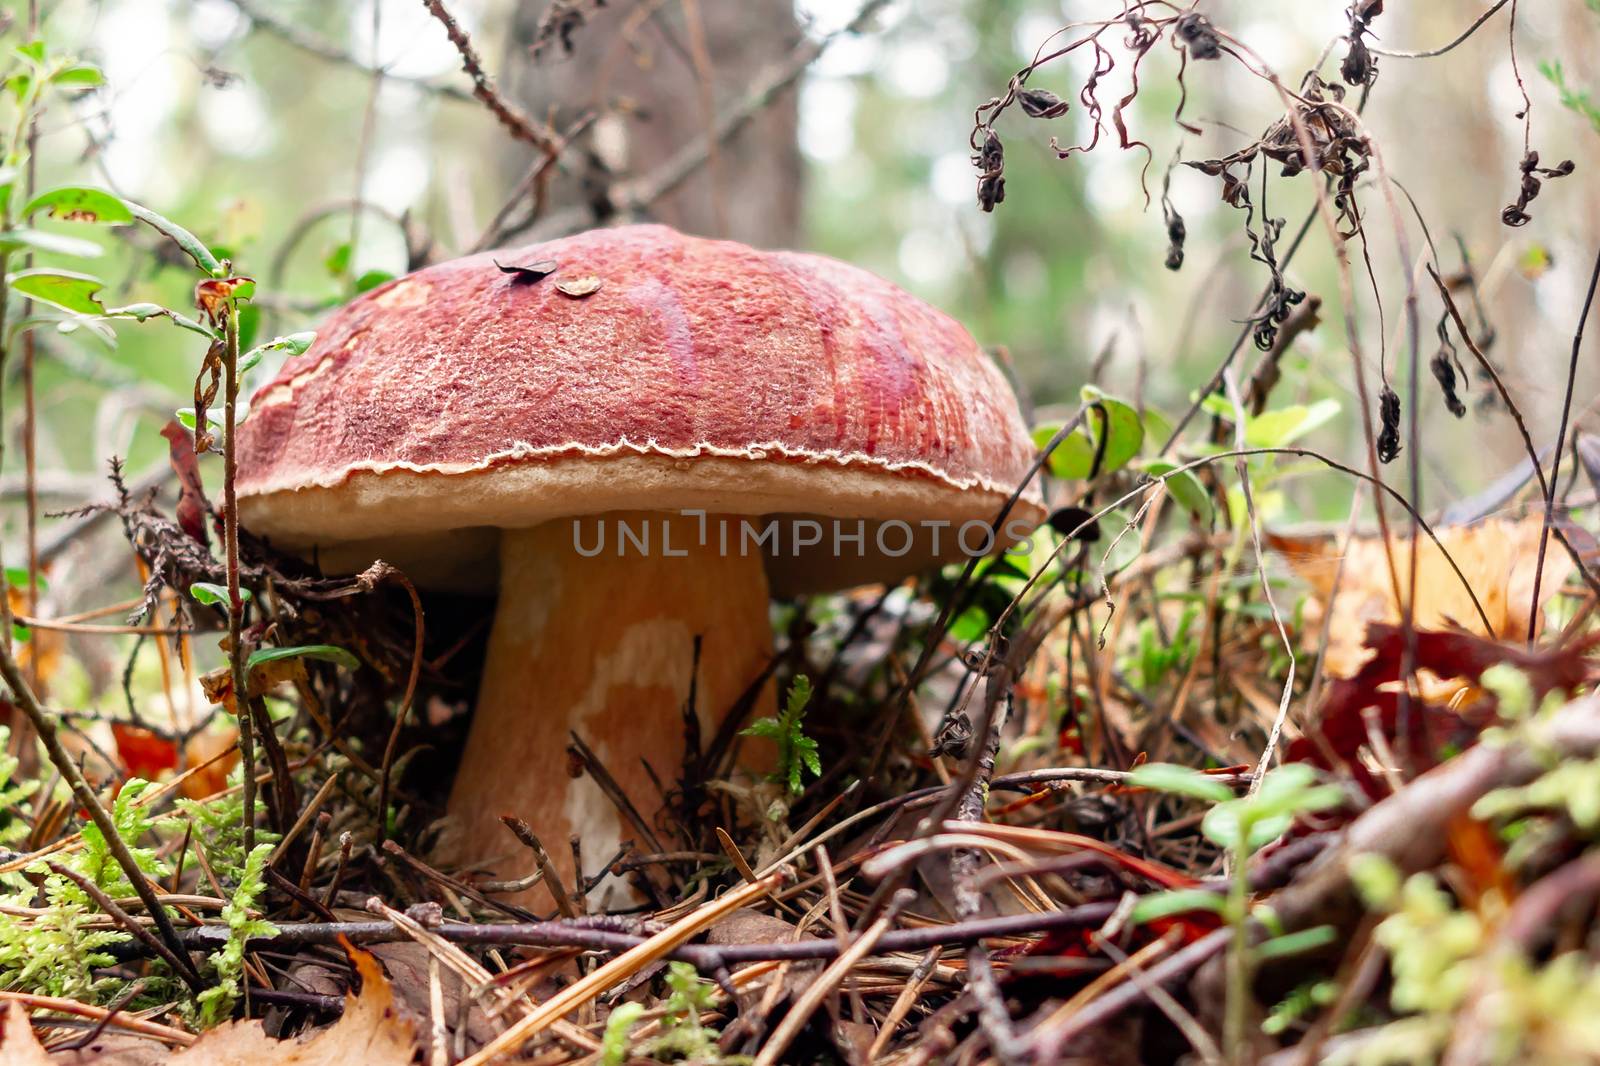 Edible boletus edulis mushroom, known as a penny bun or king bolete grows in a pine forest - image by galsand